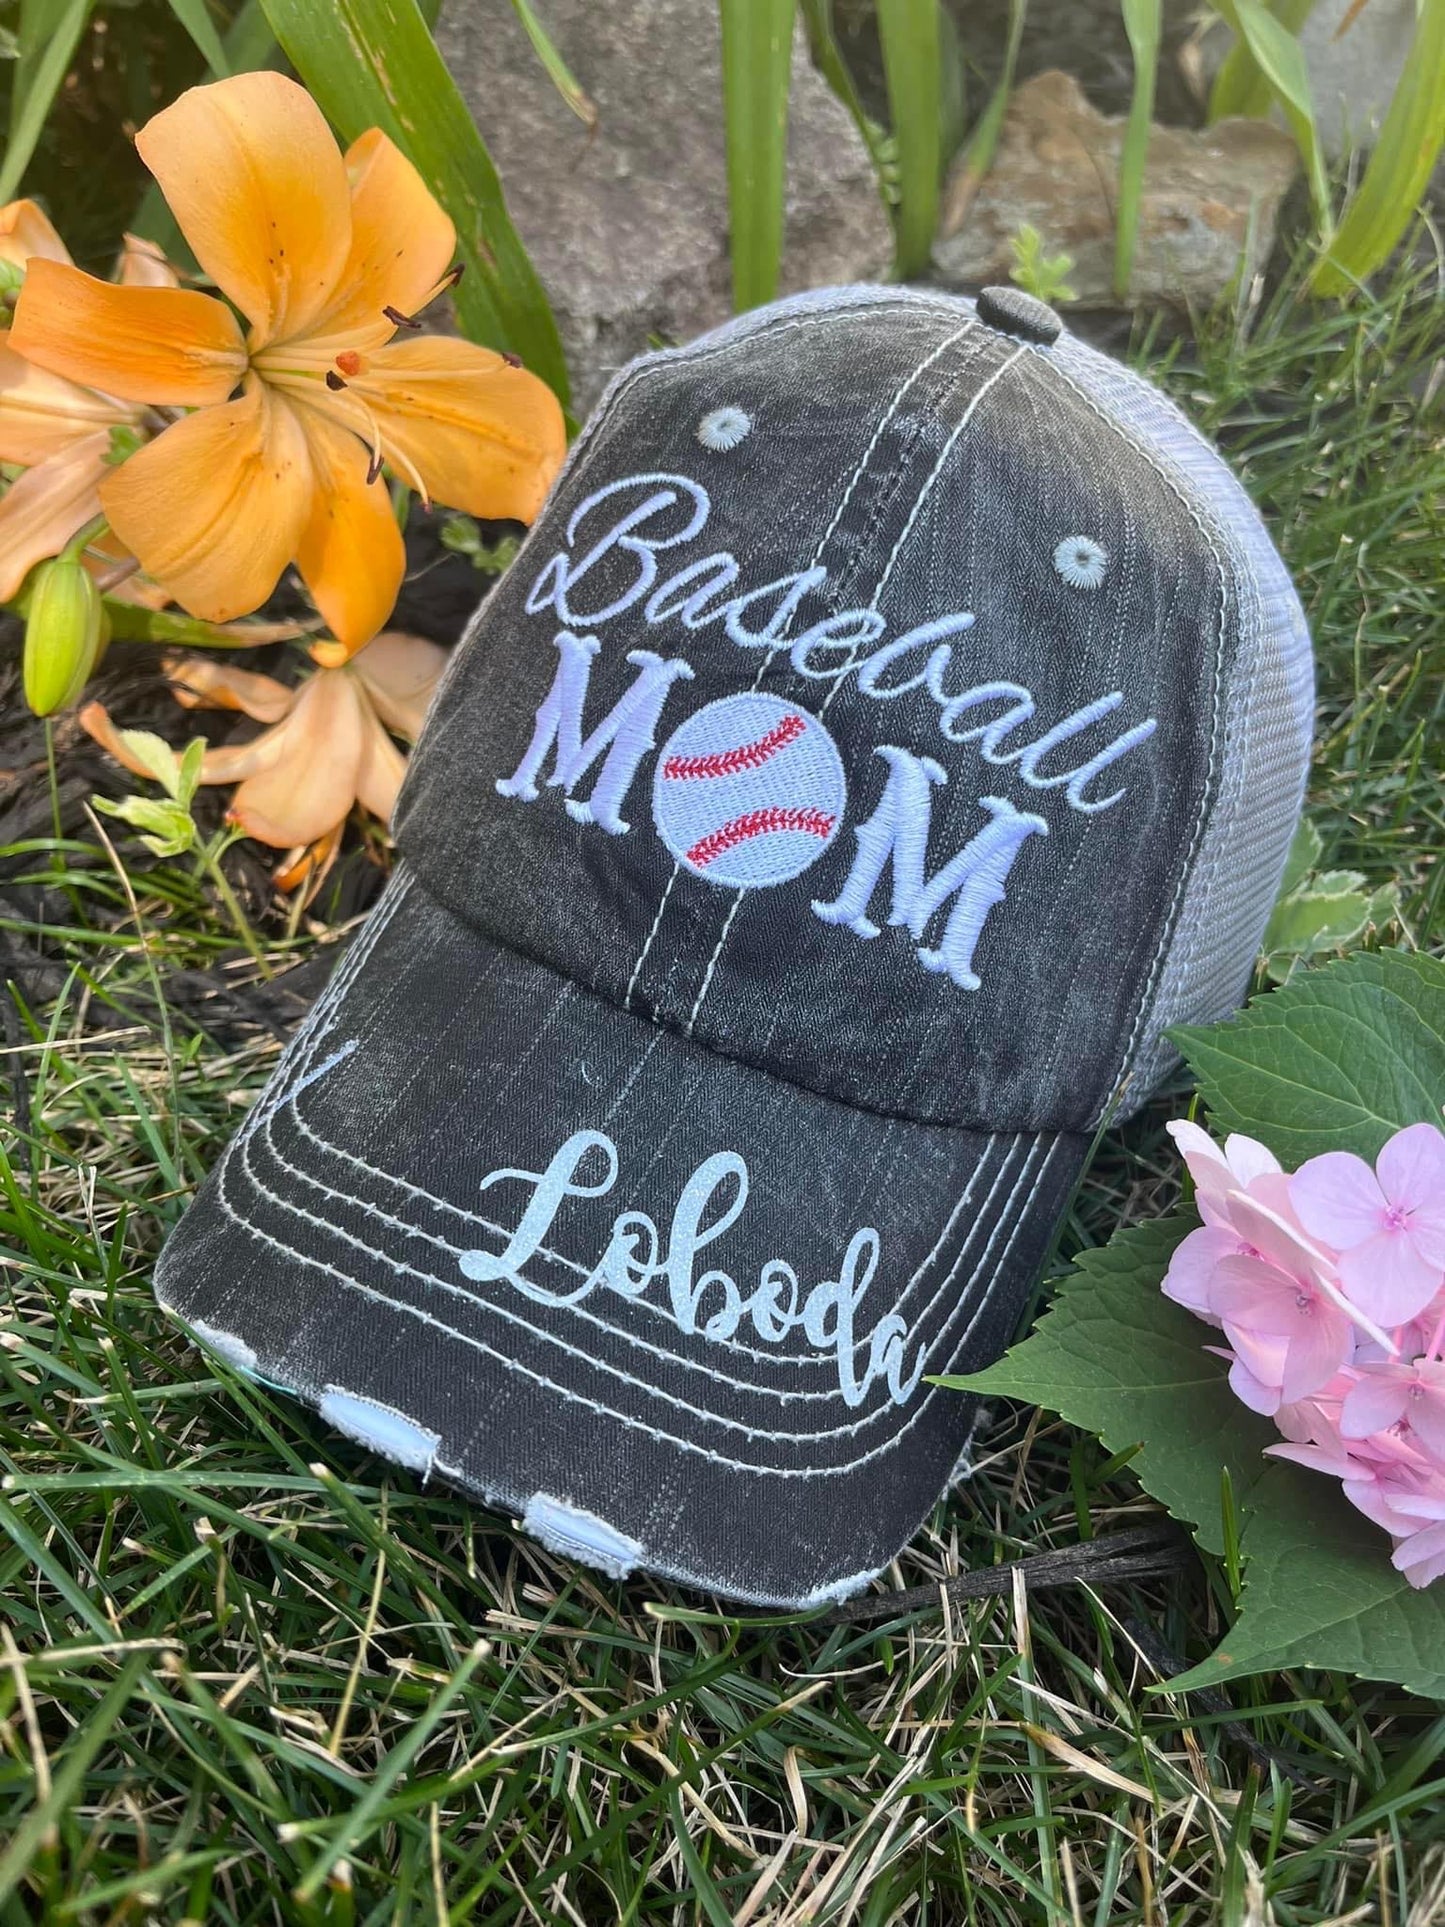 Hats Sports Boat Barn Racing Camping Lake Personalized Football mom hat Embroidered distressed womens trucker cap SHIPS in 2-3 days